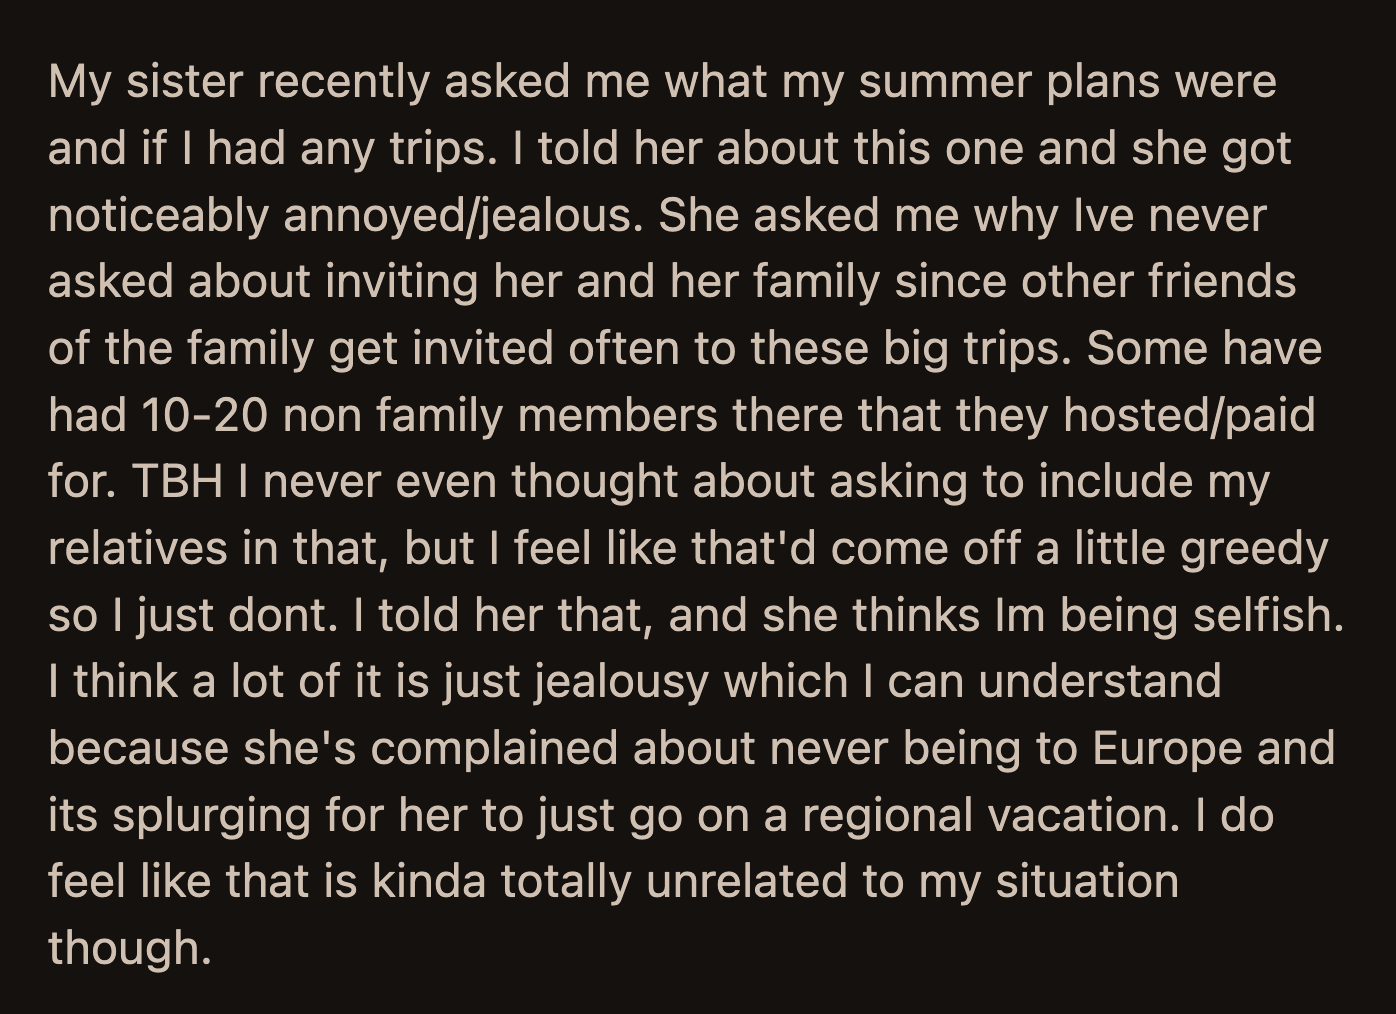 OP admitted he never thought to ask. He also felt it would be tacky and greedy if he asked. He told his sister as much, but she complained about how she could never afford these vacations.